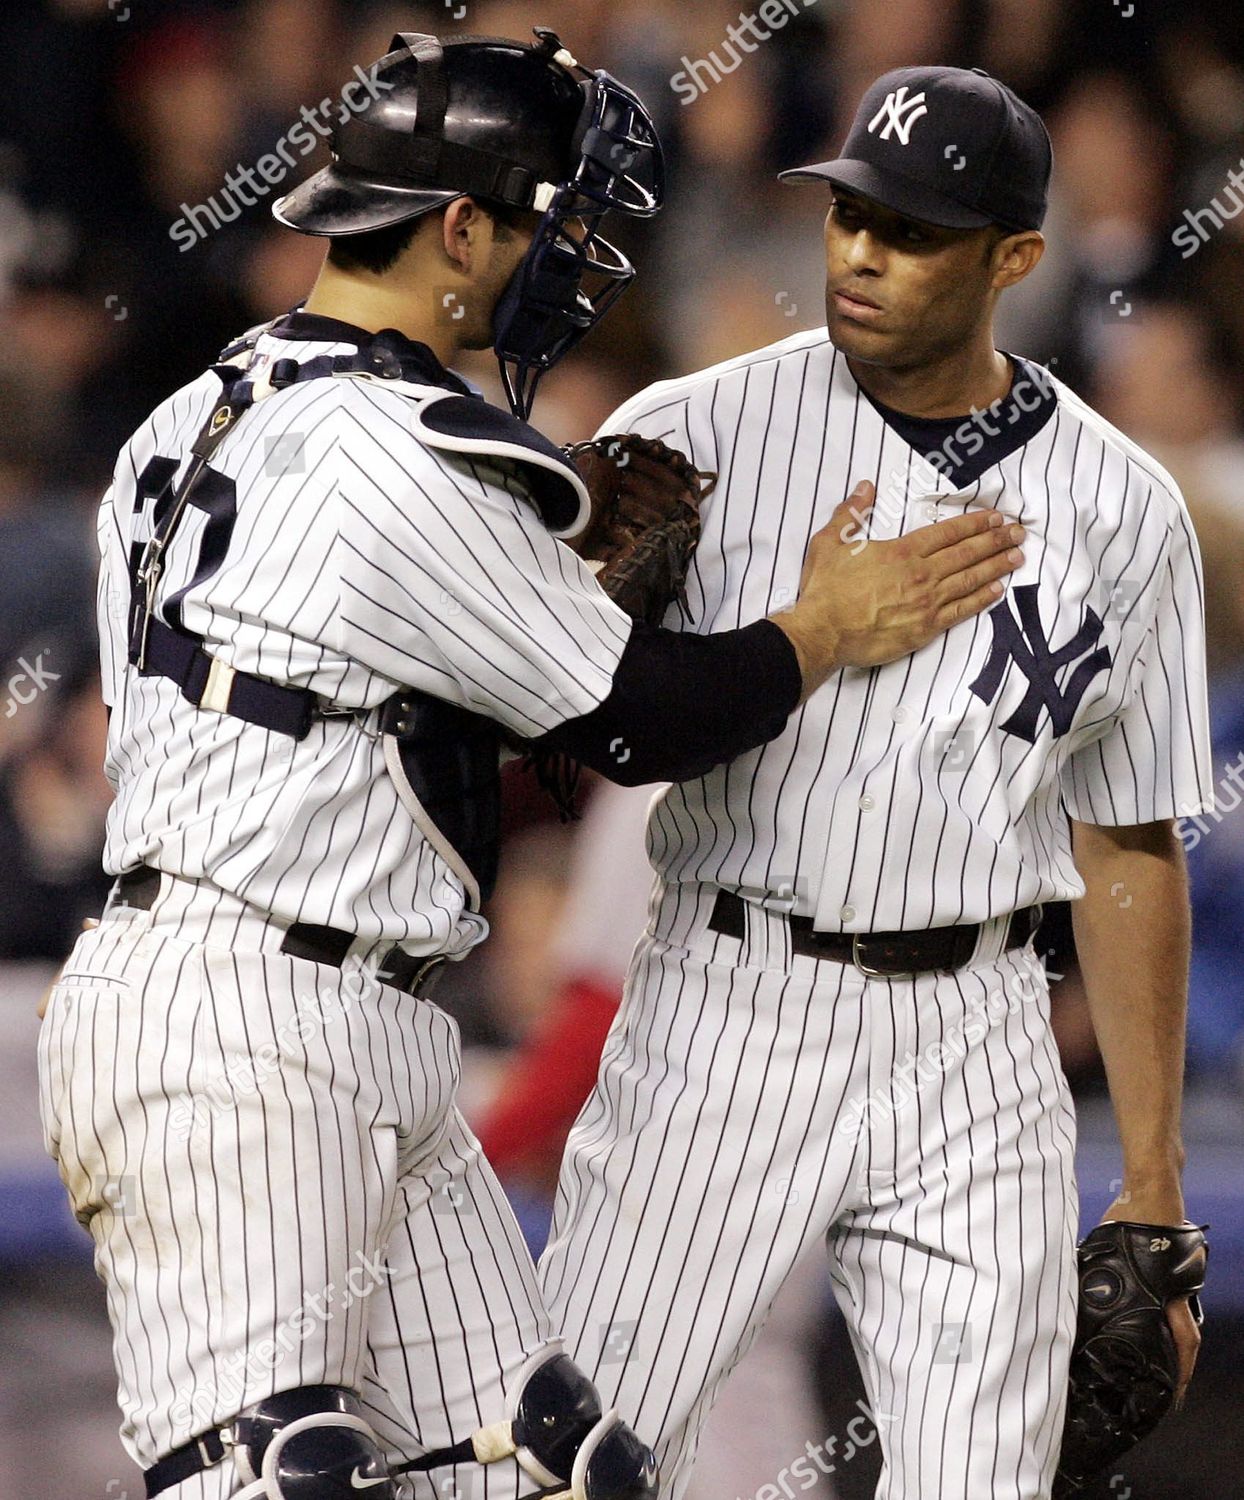 New York Yankees catcher Jorge Posada (R) is congratulated after